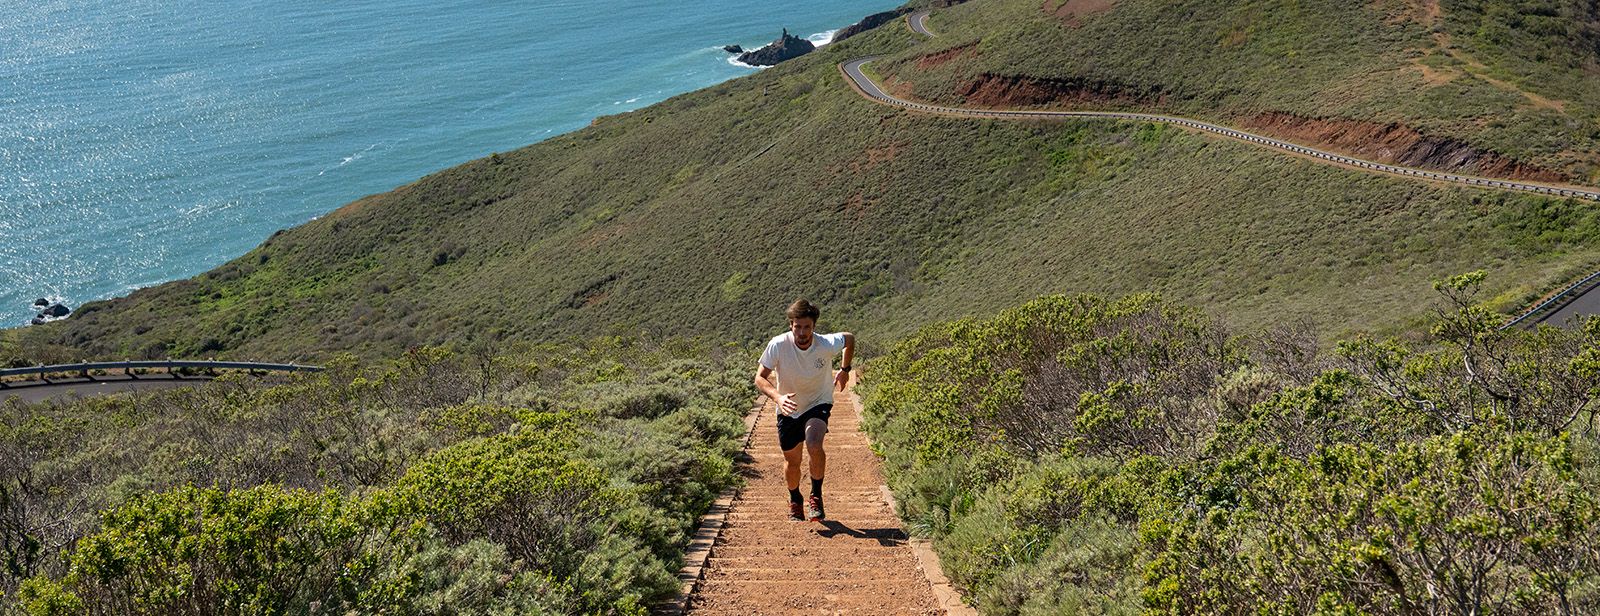 Man running up stairs near coastline in ASICS clothing.